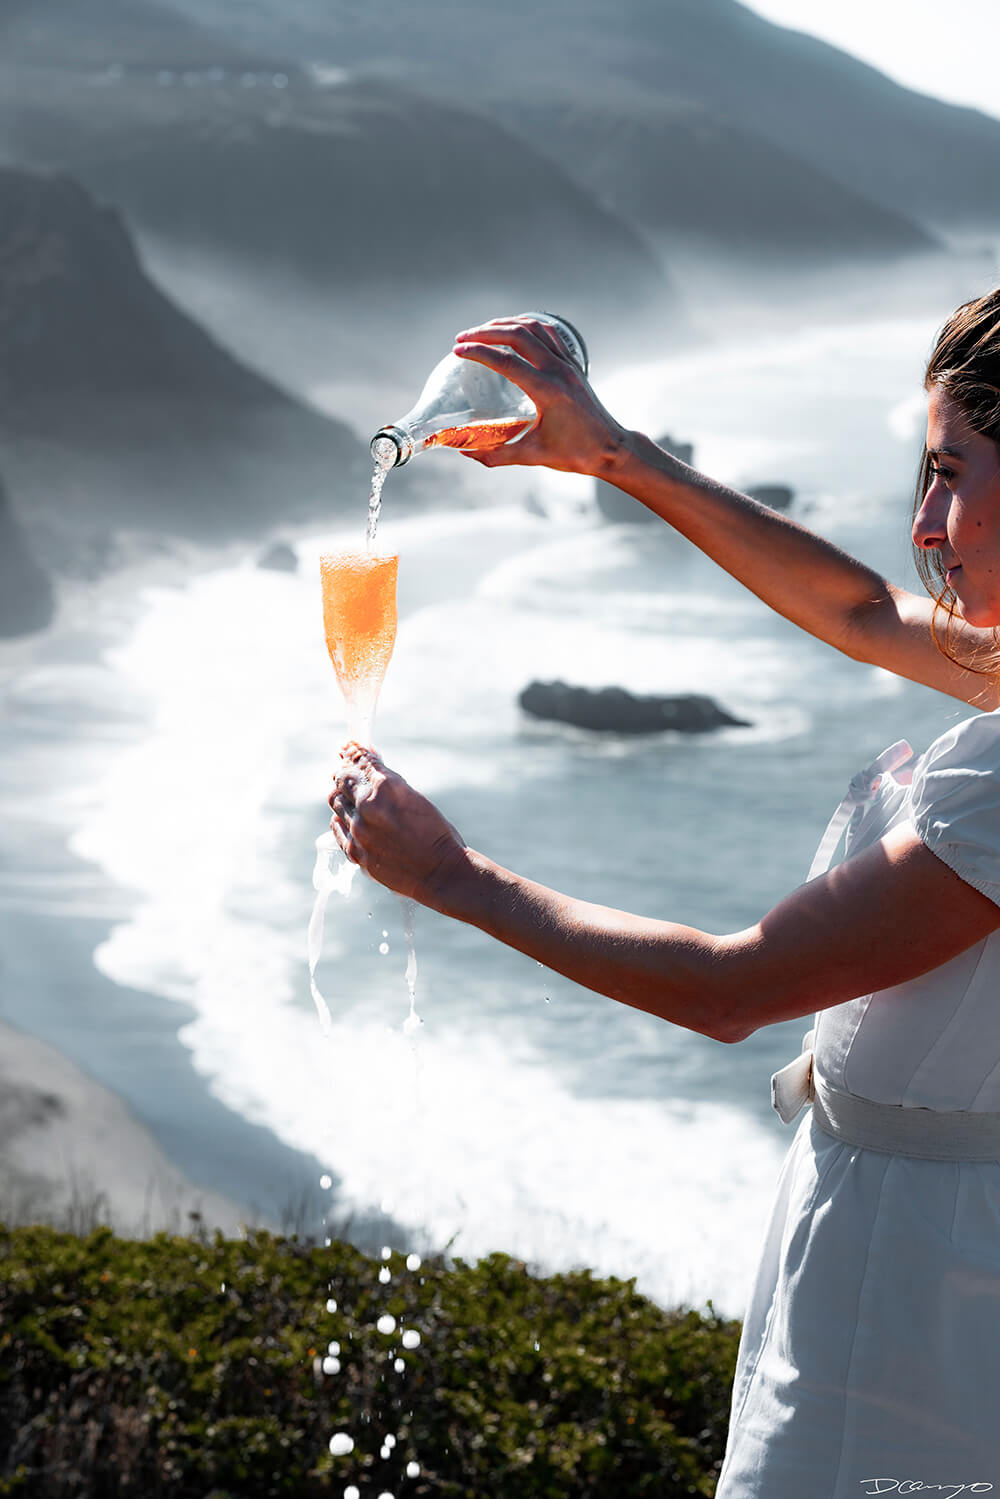 Photos with Leah Nebbett of Styles and Stems. Photographing for Alsace wines in Goat Rock Beach, Jenner, CA on September 27, 2020.